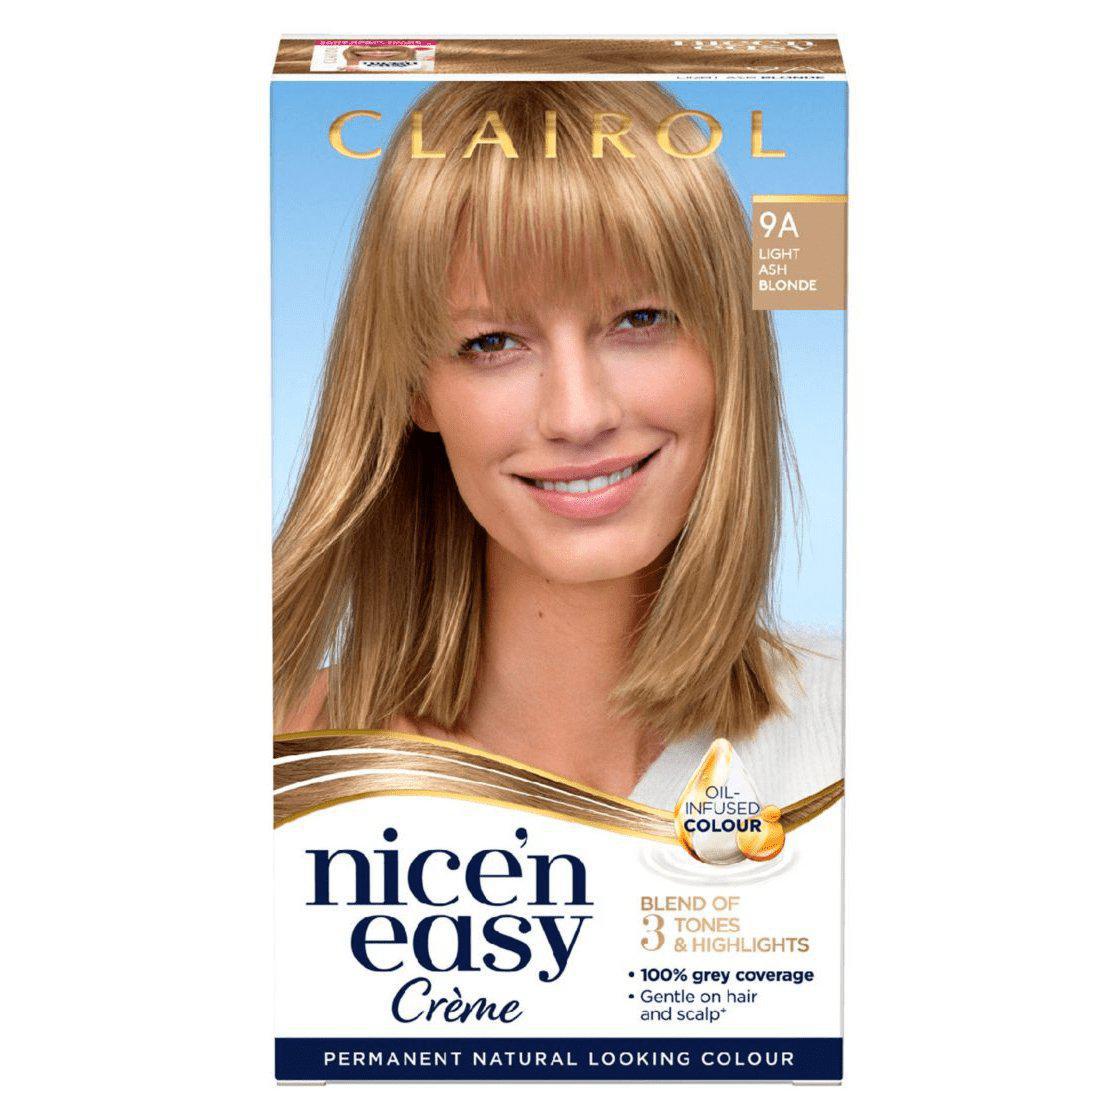 Clairol Nice N Easy Crème Natural Permanent Hair Dye - 9A Light Ash Blonde - Healthxpress.ie